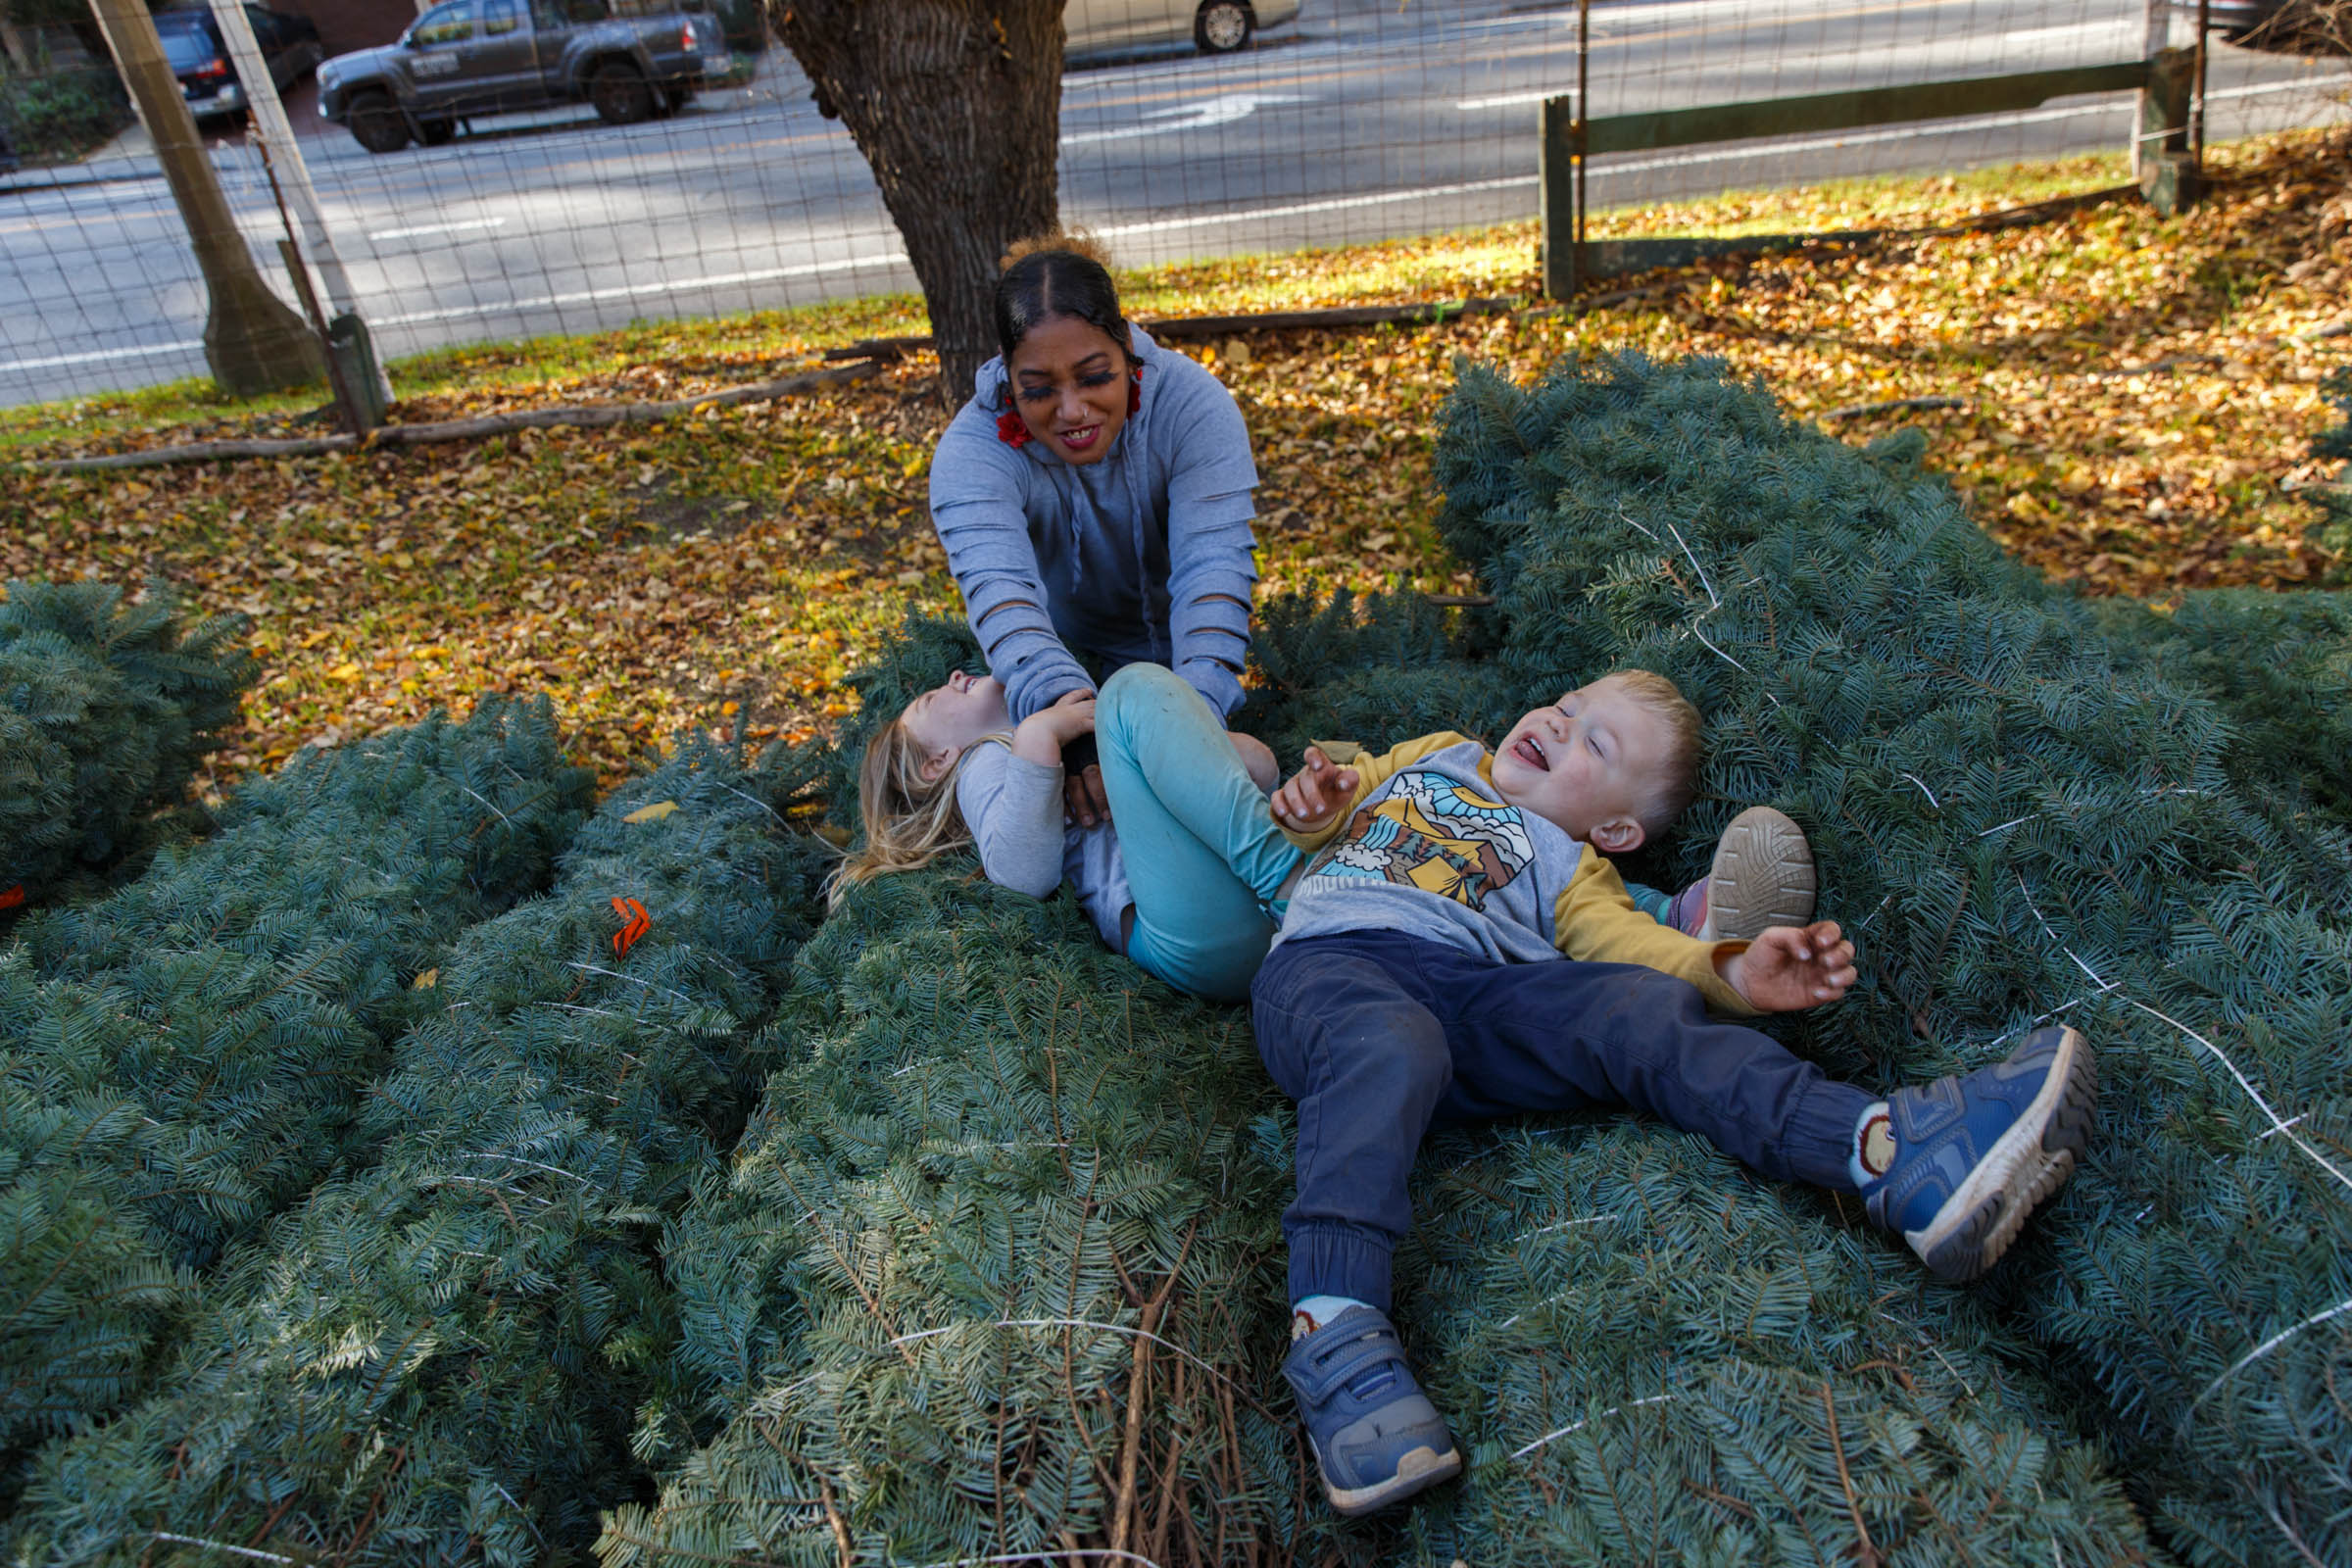 A woman and child play on a pile of wrapped up Christmas trees.